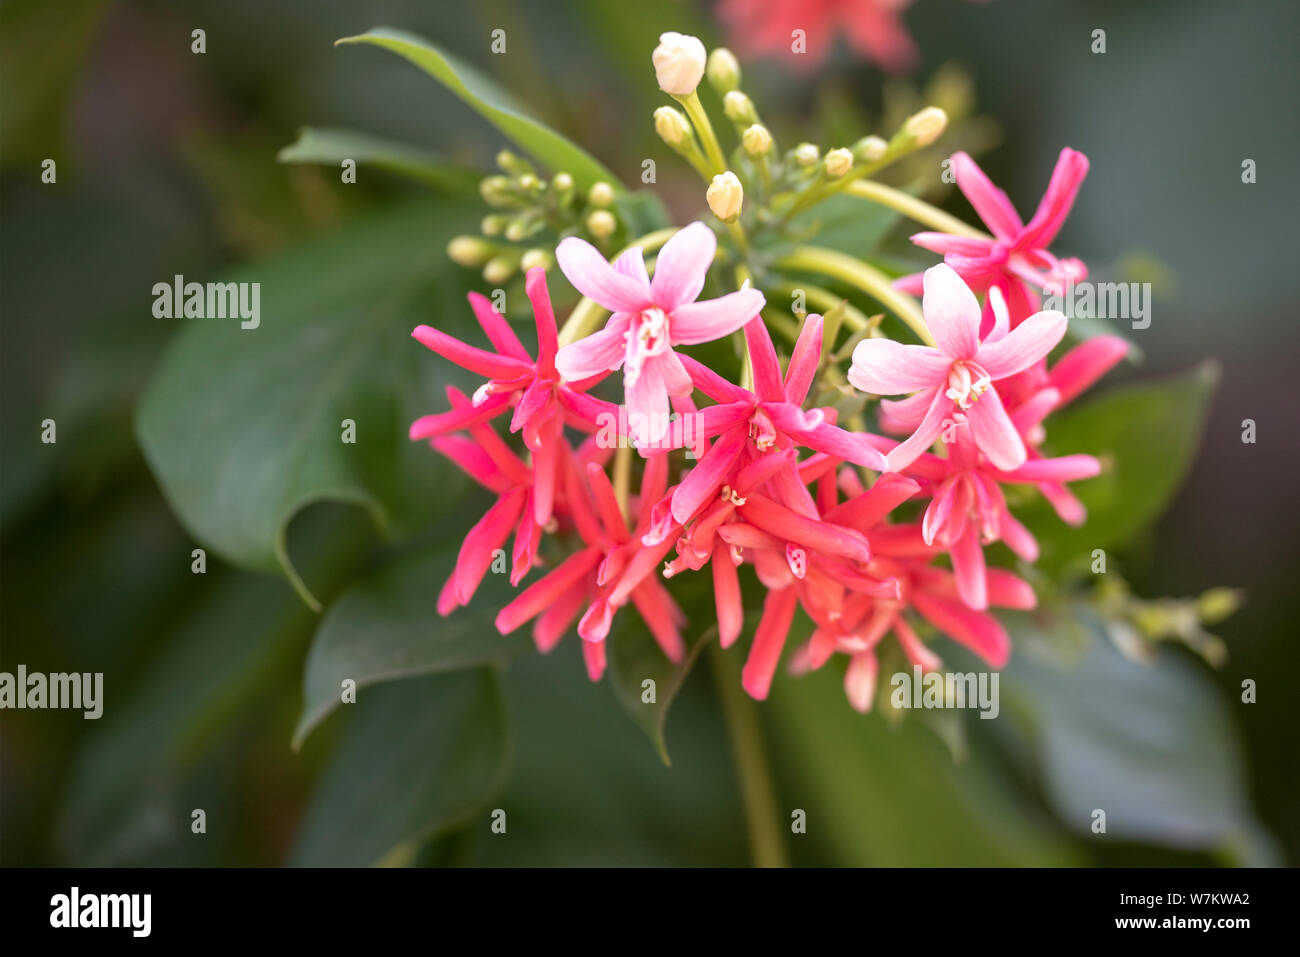 Flowers of the plant Quisqualis indica close-up in natural light. Thailand. Stock Photo